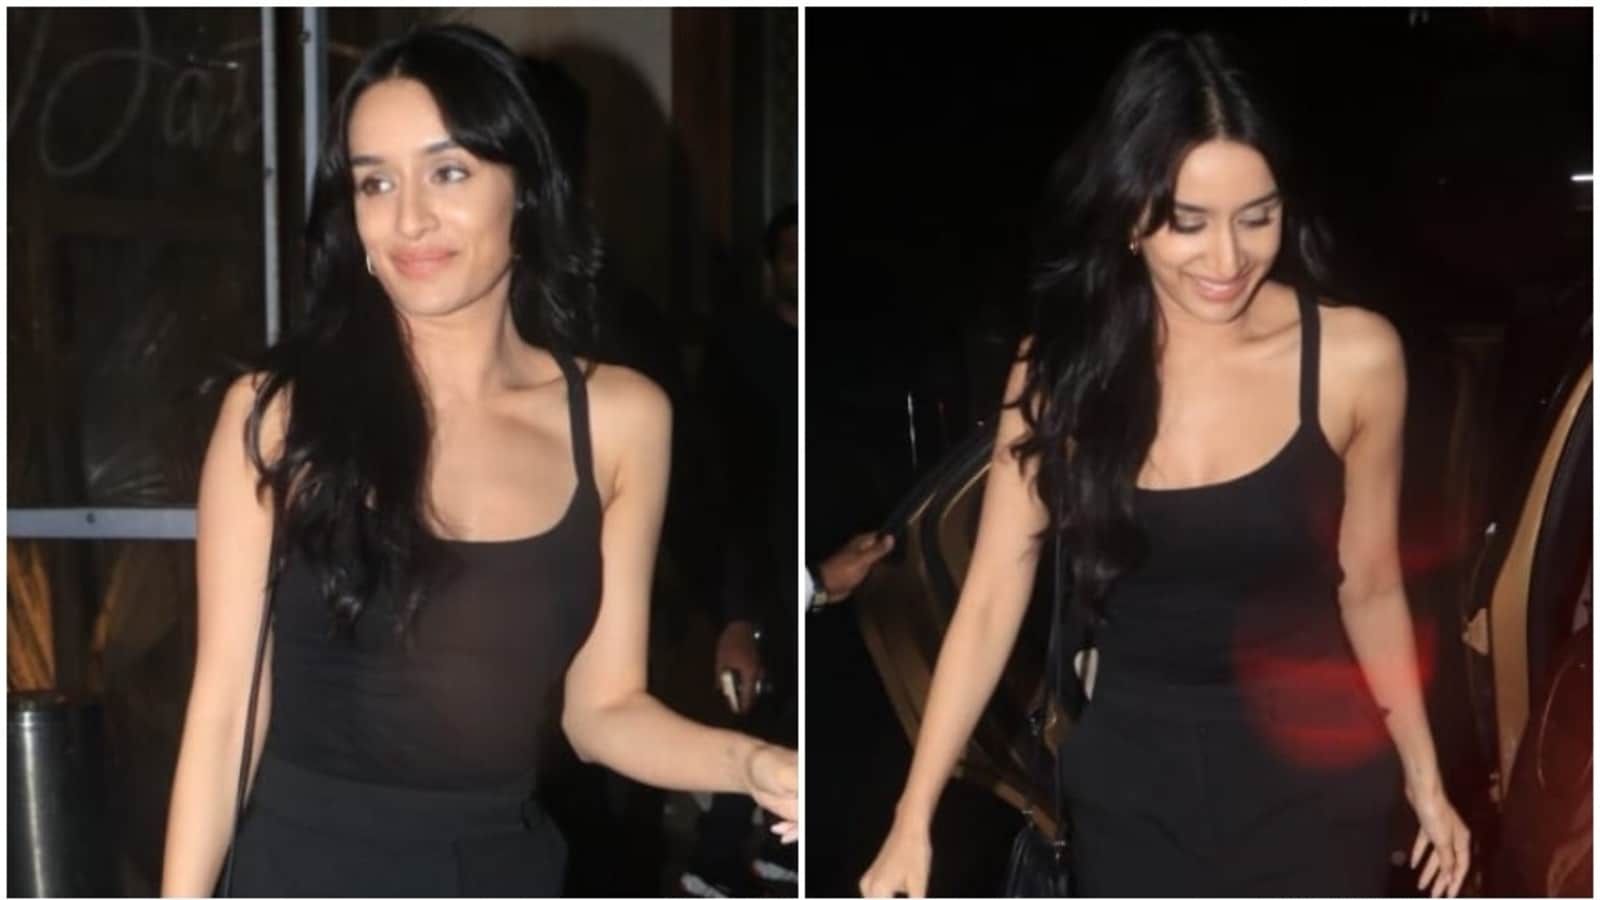 Carina Kpor Sxs Video - Shraddha Kapoor in black tank top and satin pants pulls off effortless  girl-next-door look: See pics and video | Fashion Trends - Hindustan Times